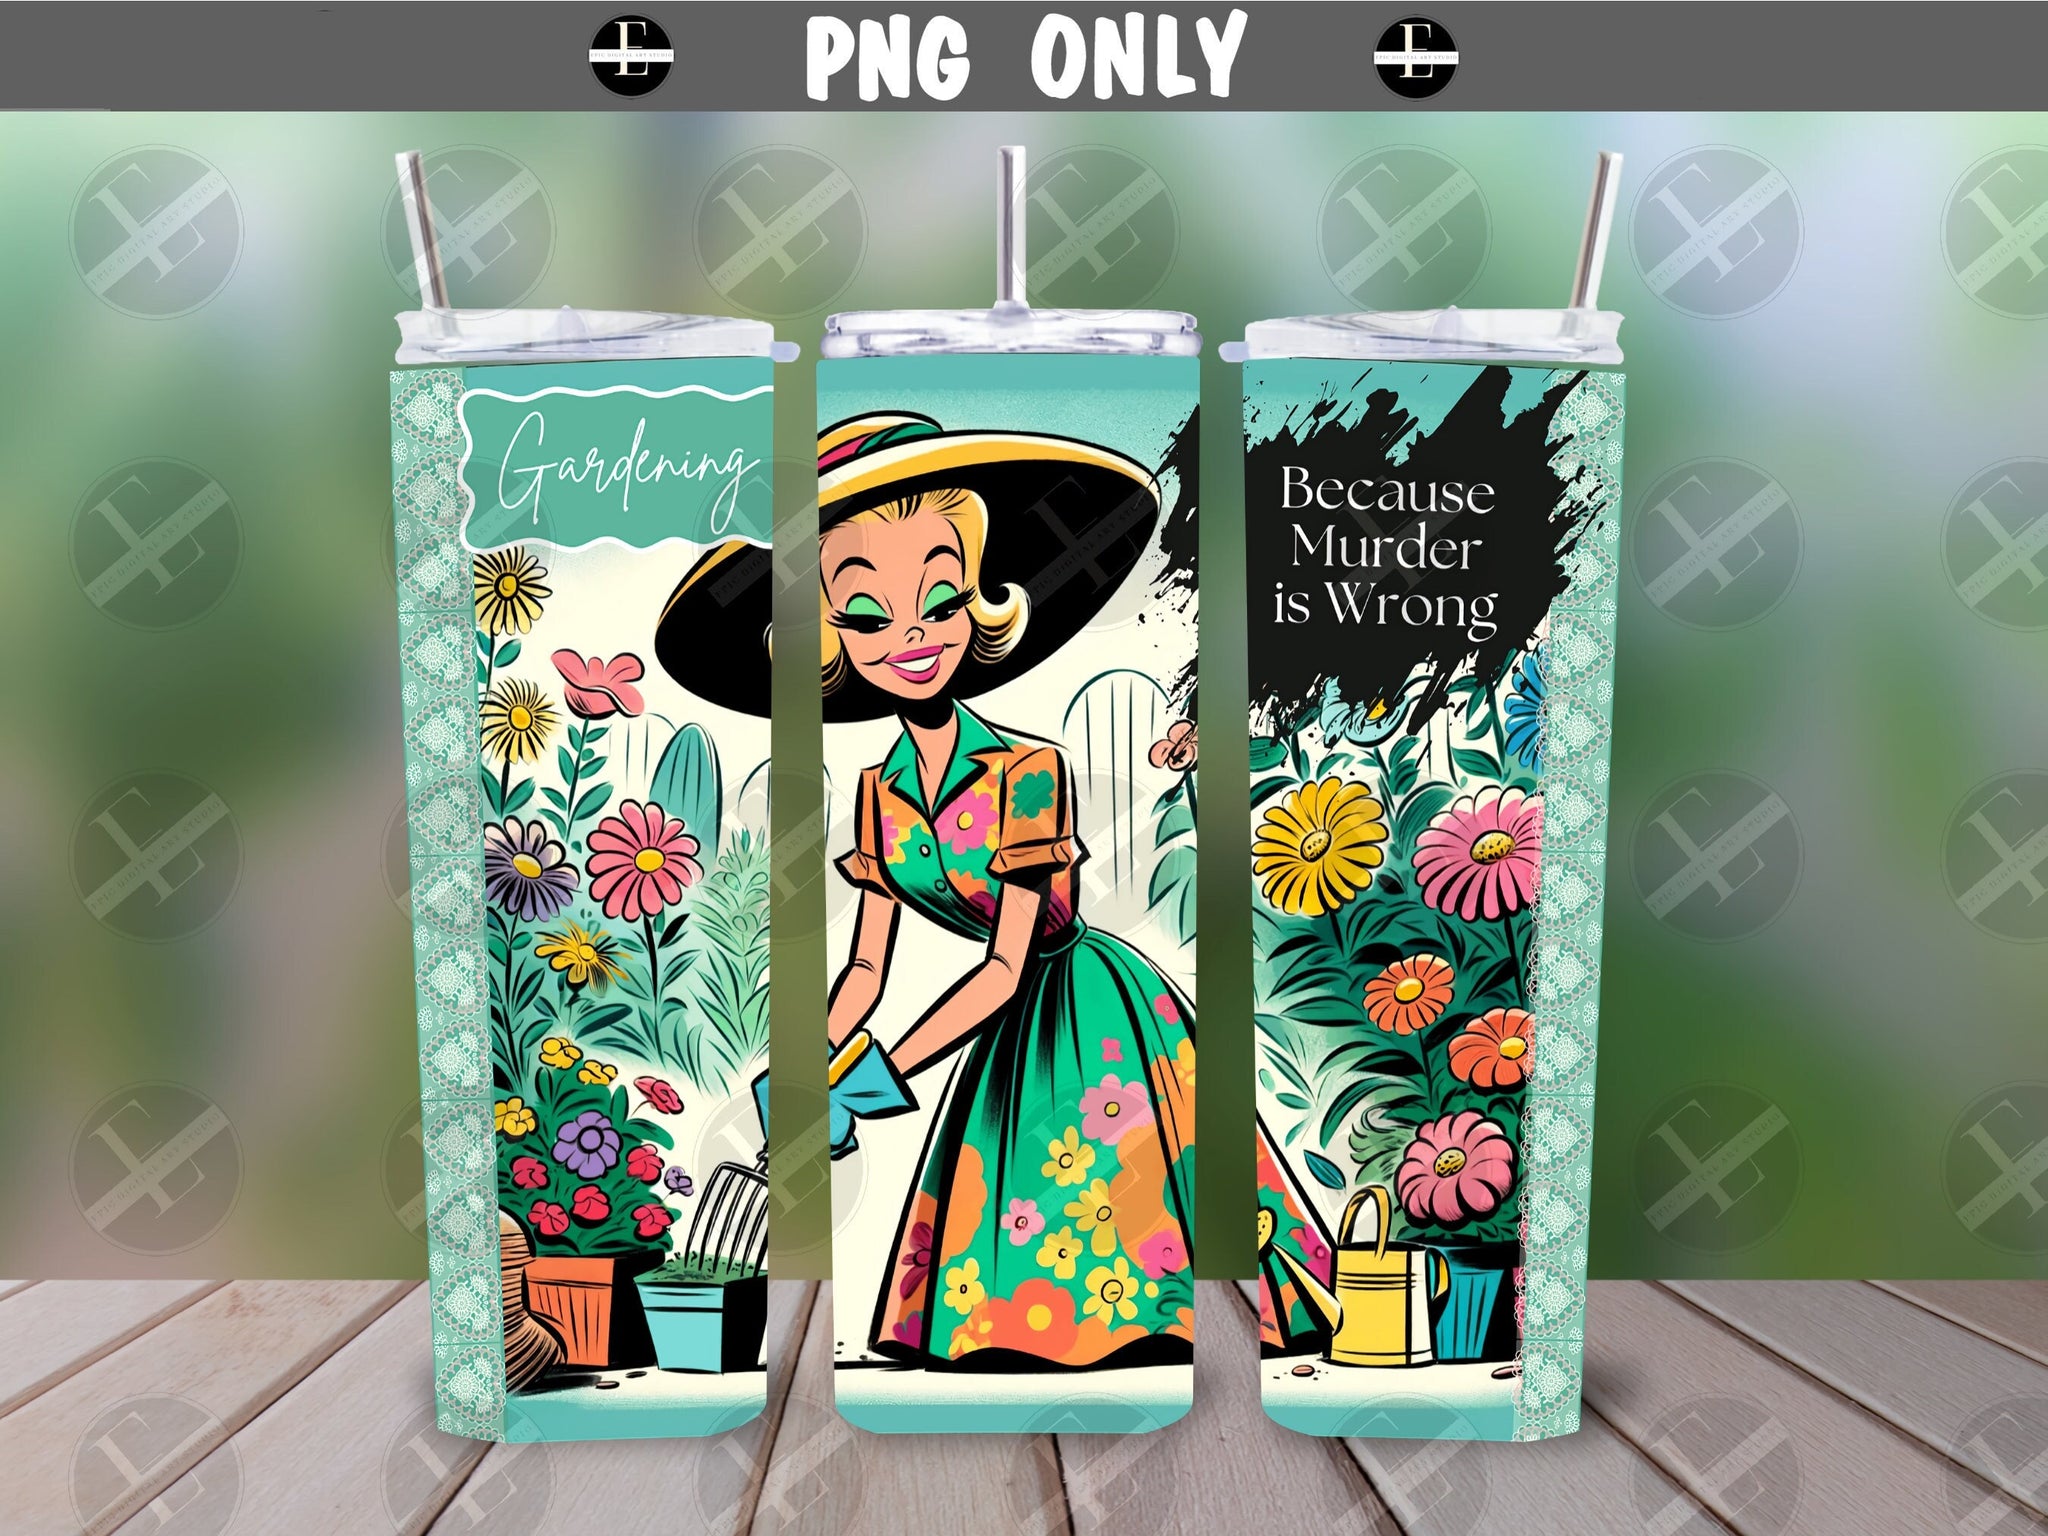 funny gardening because murder is wrong tumbler wrap, gardening tumbler image, 20ozs wrap design, 20ozs skinny wraps, 20ozs wraps designs, tumbler 20ozs wraps, tumbler wrap 20ozs, wrap design 20ozs, wrap png design 20ozs, 20ozs wraps, 20ozs wrap